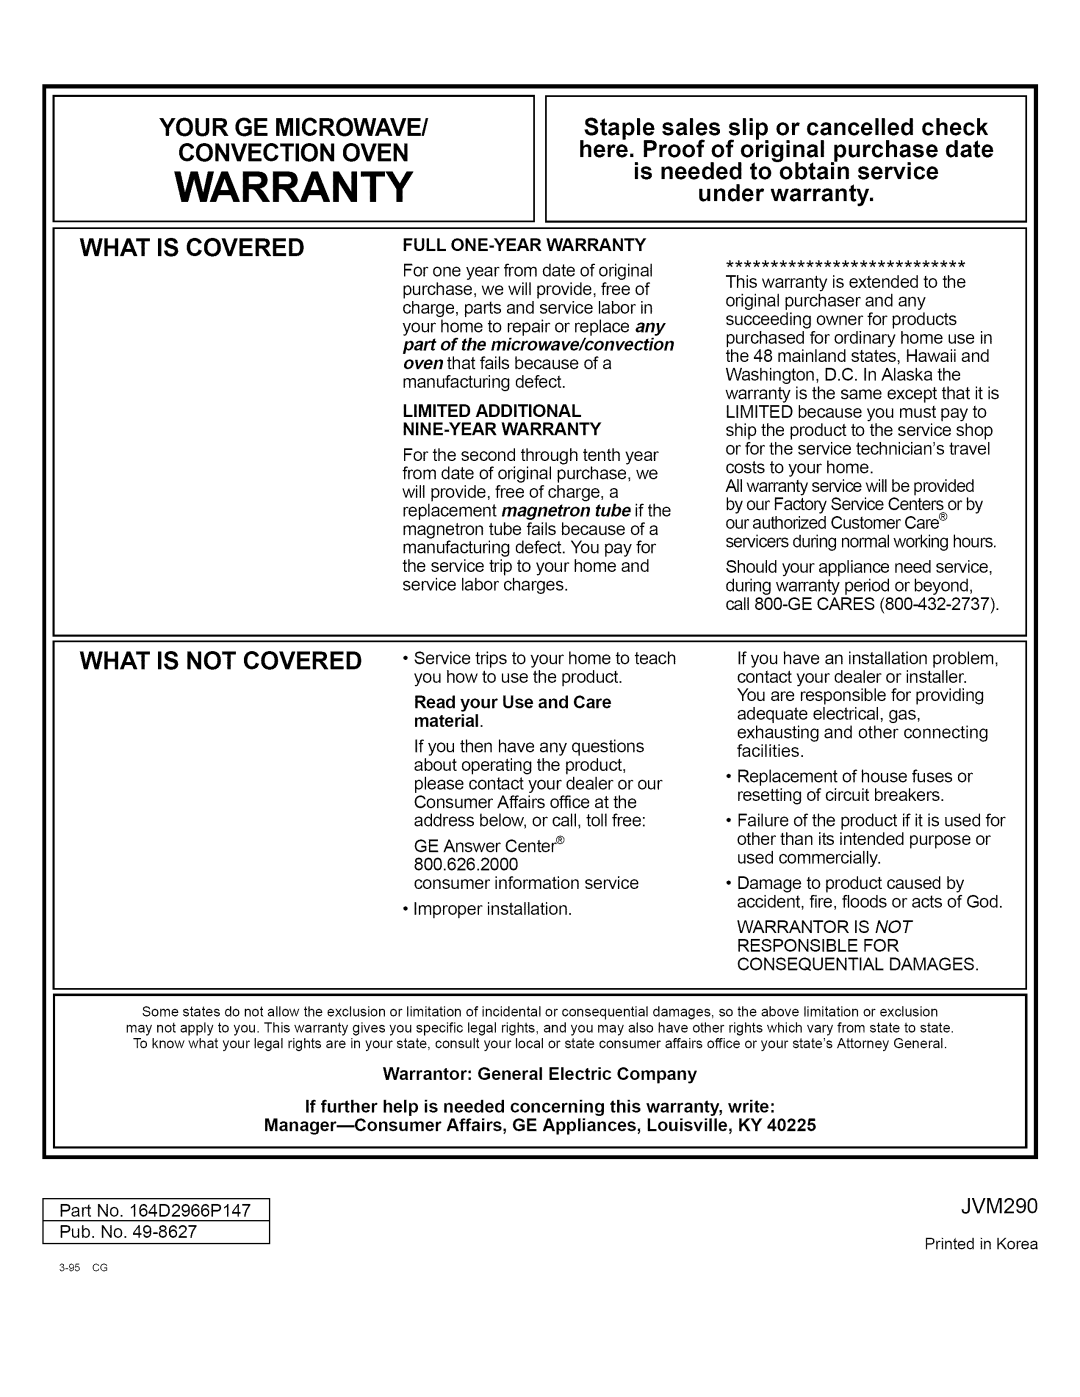 GE JVM290 Warranty, Your Ge Microwave, Staple sales slip or cancelled check, Convection Oven, is needed to obtain service 